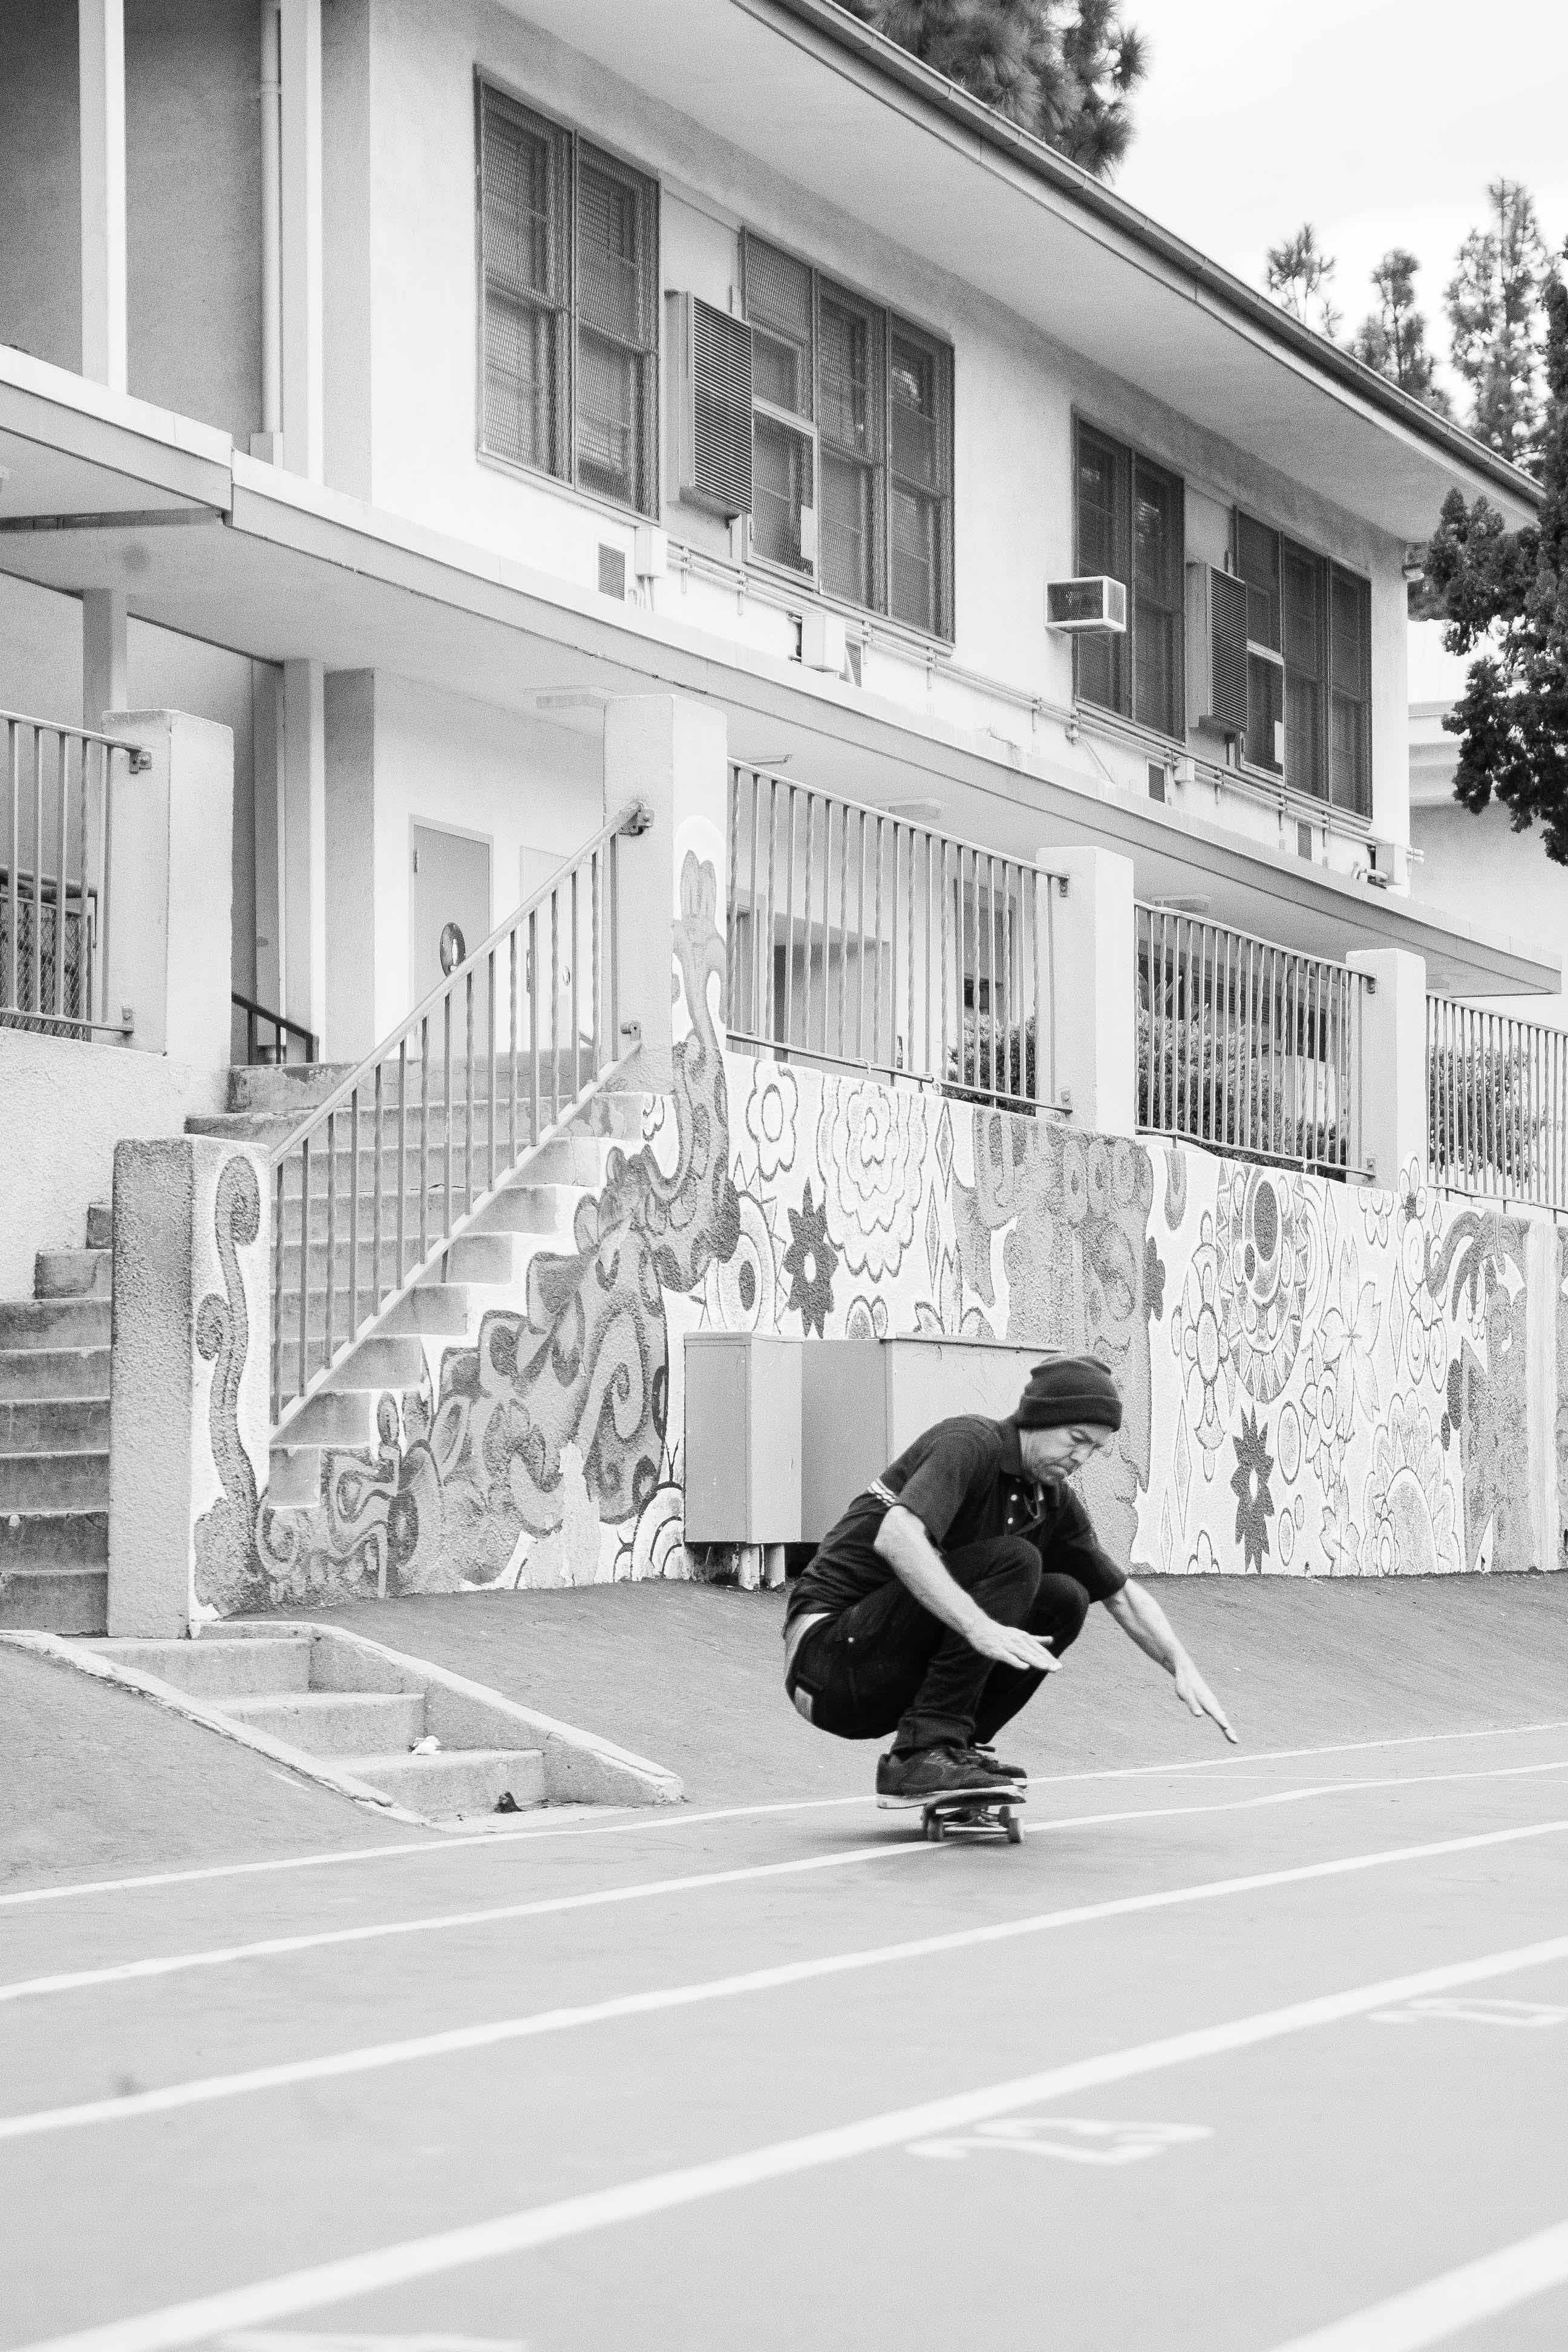 YOON REMEMBERS HIS FIRST ANDREW REYNOLDS FRONTSIDE FLIP